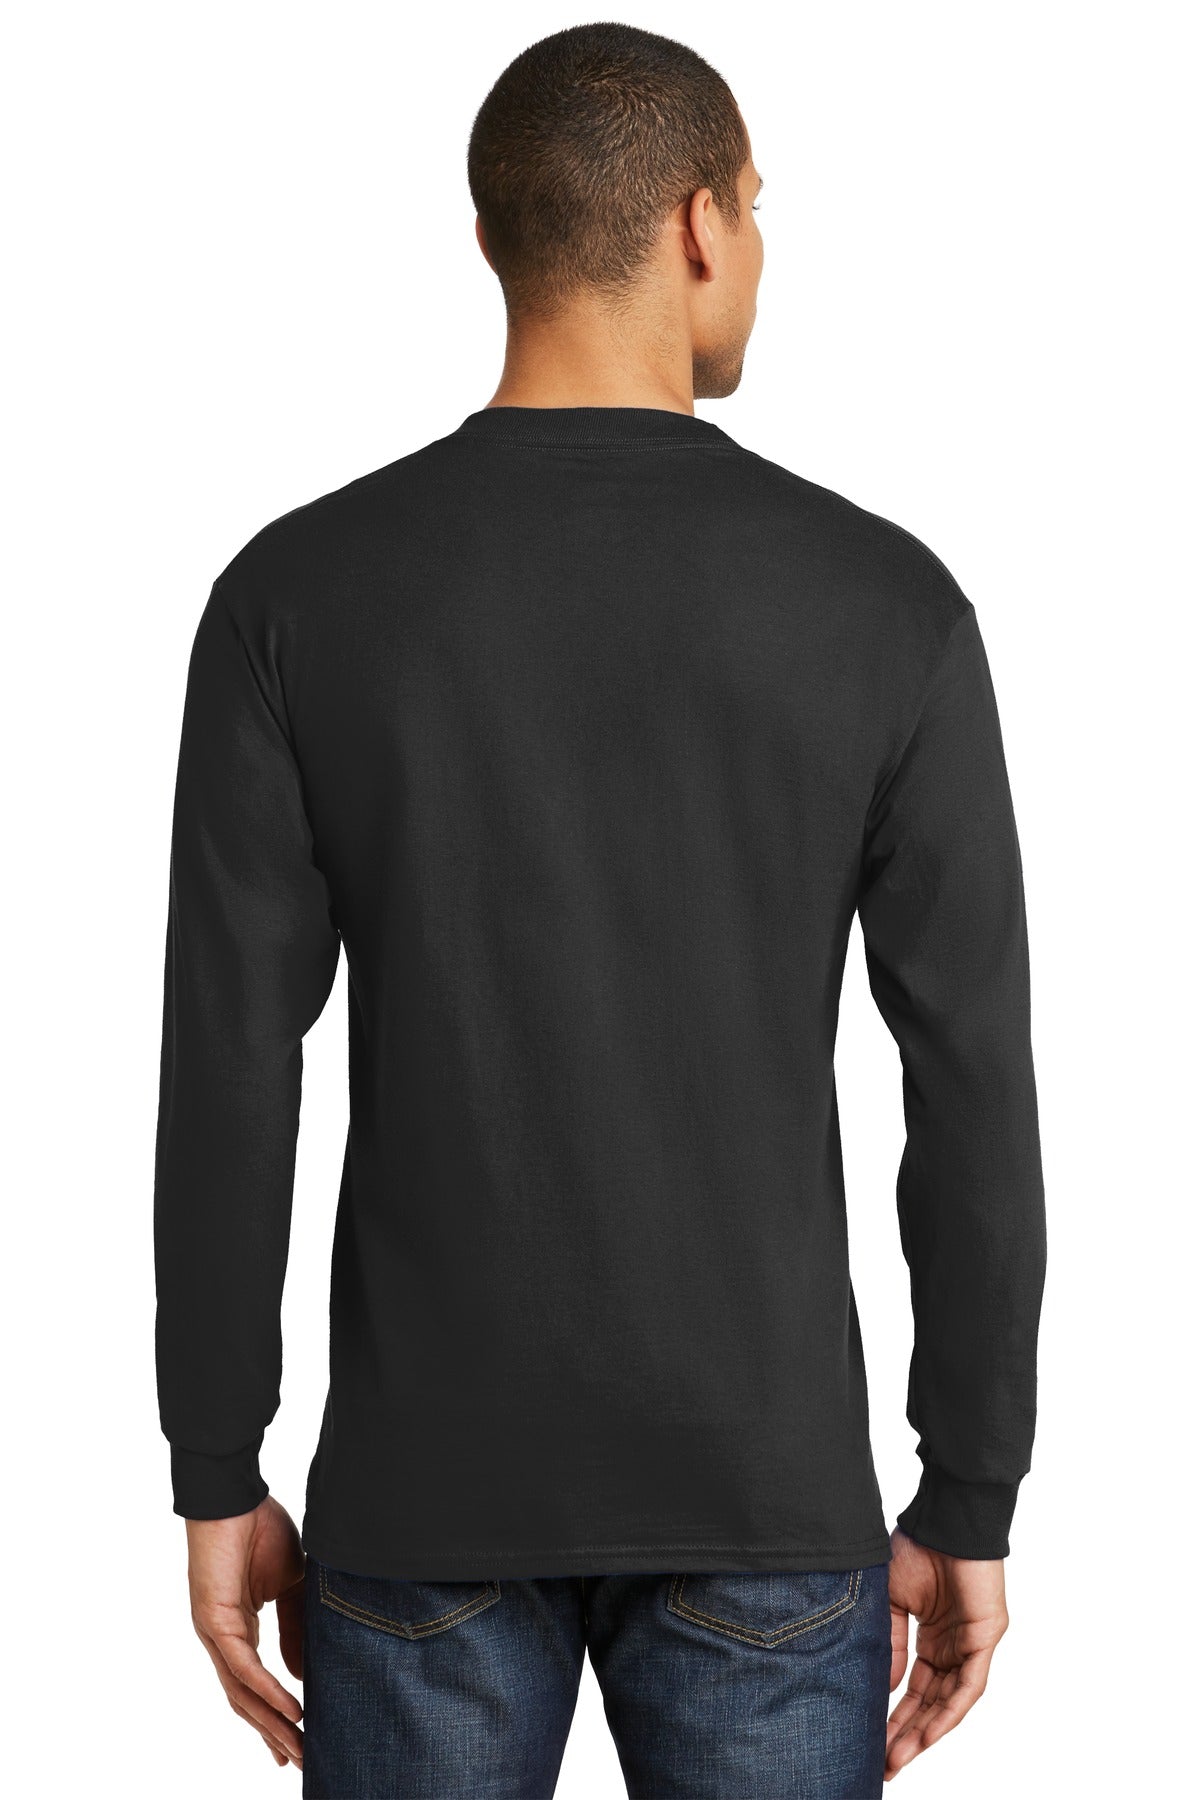 Hanes Beefy-T - 100% Cotton Long Sleeve T-Shirt. 5186